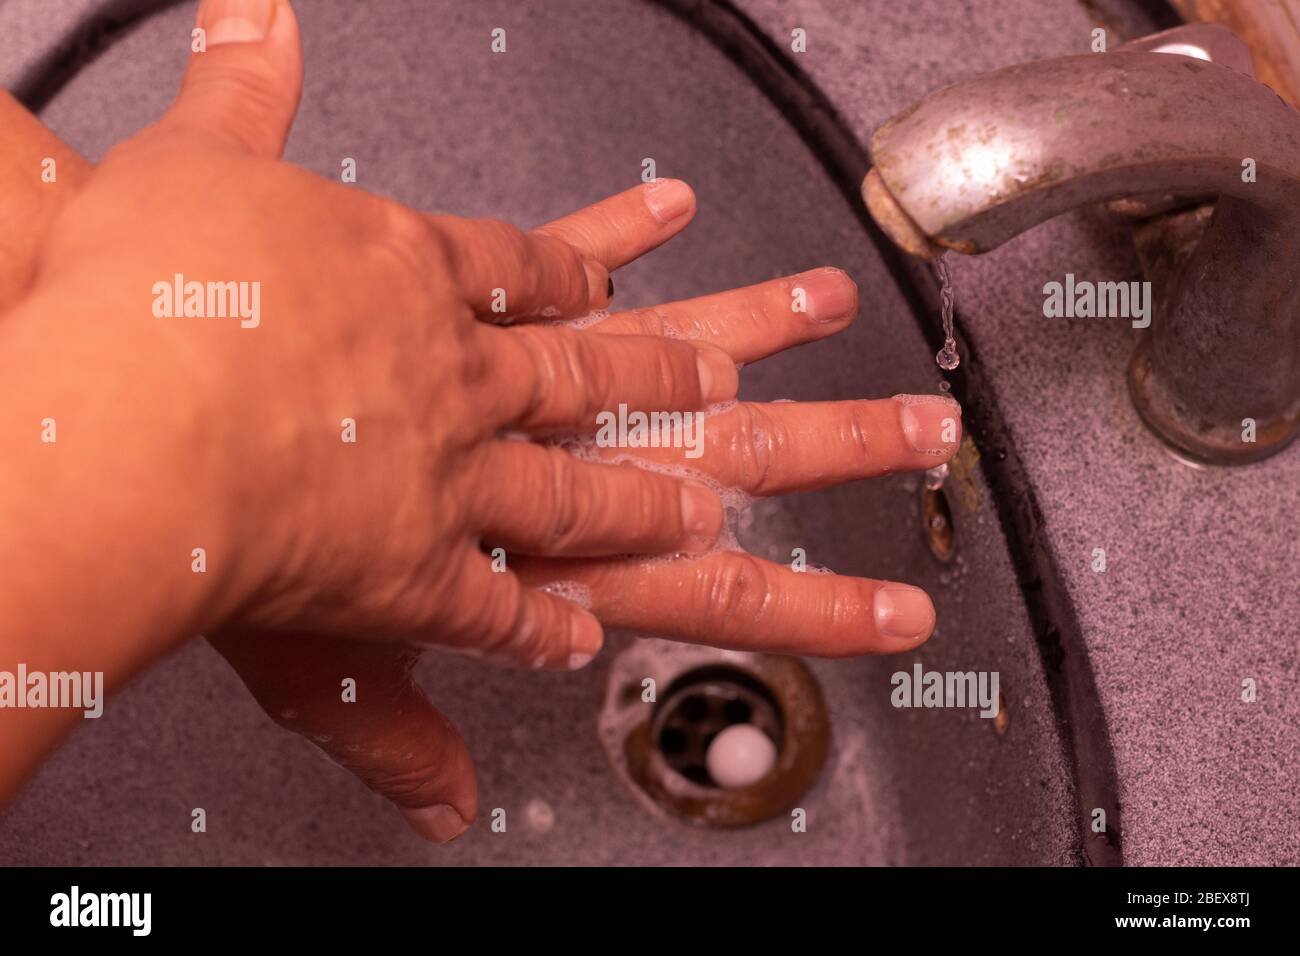 Washing hands pictures in the time of pandemic Stock Photo